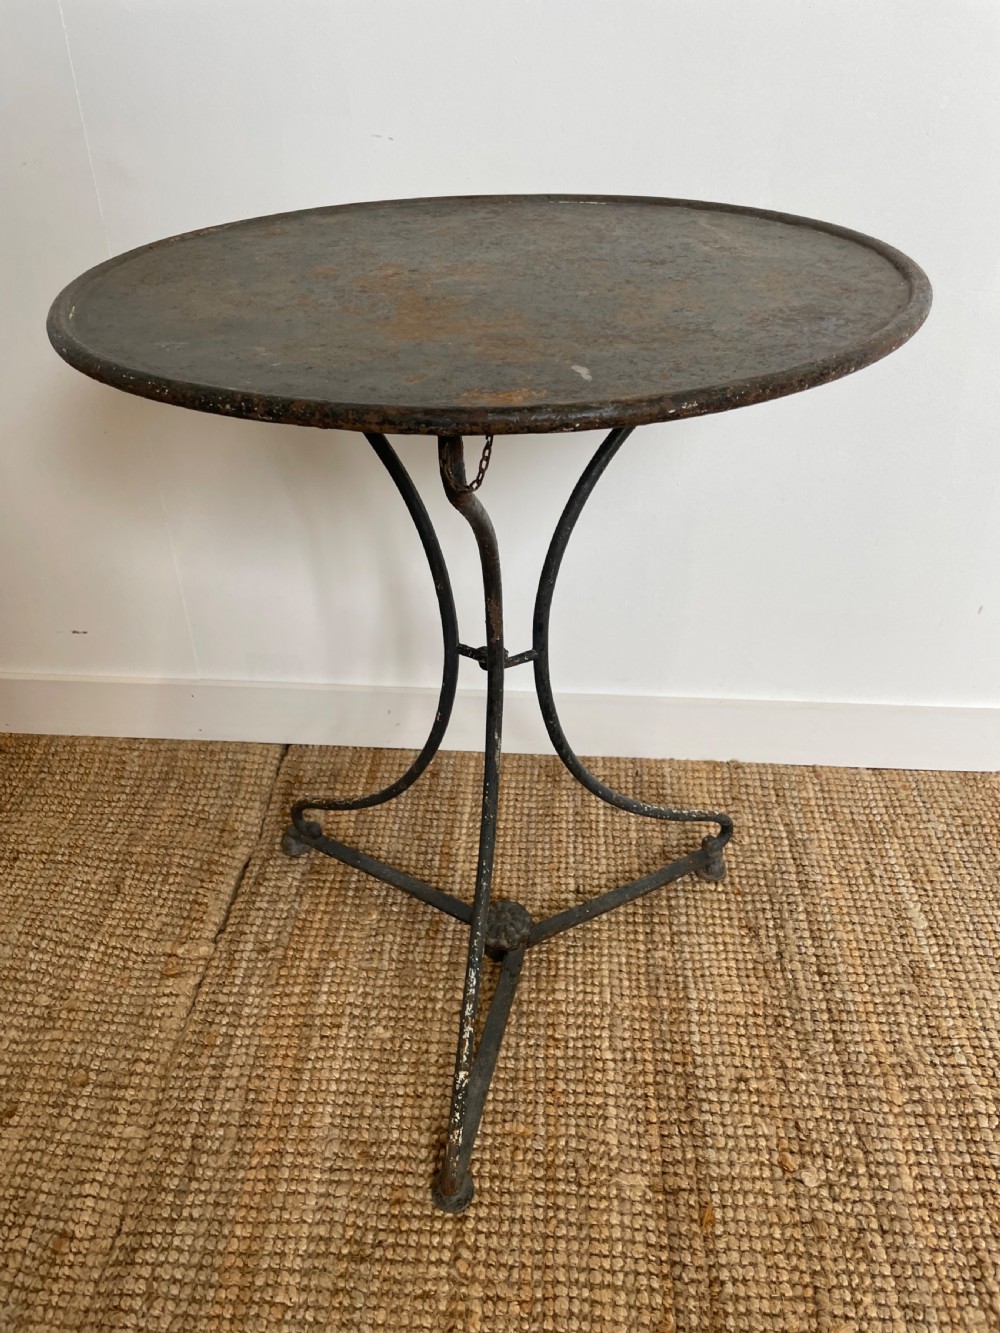 very unusual cast iron table